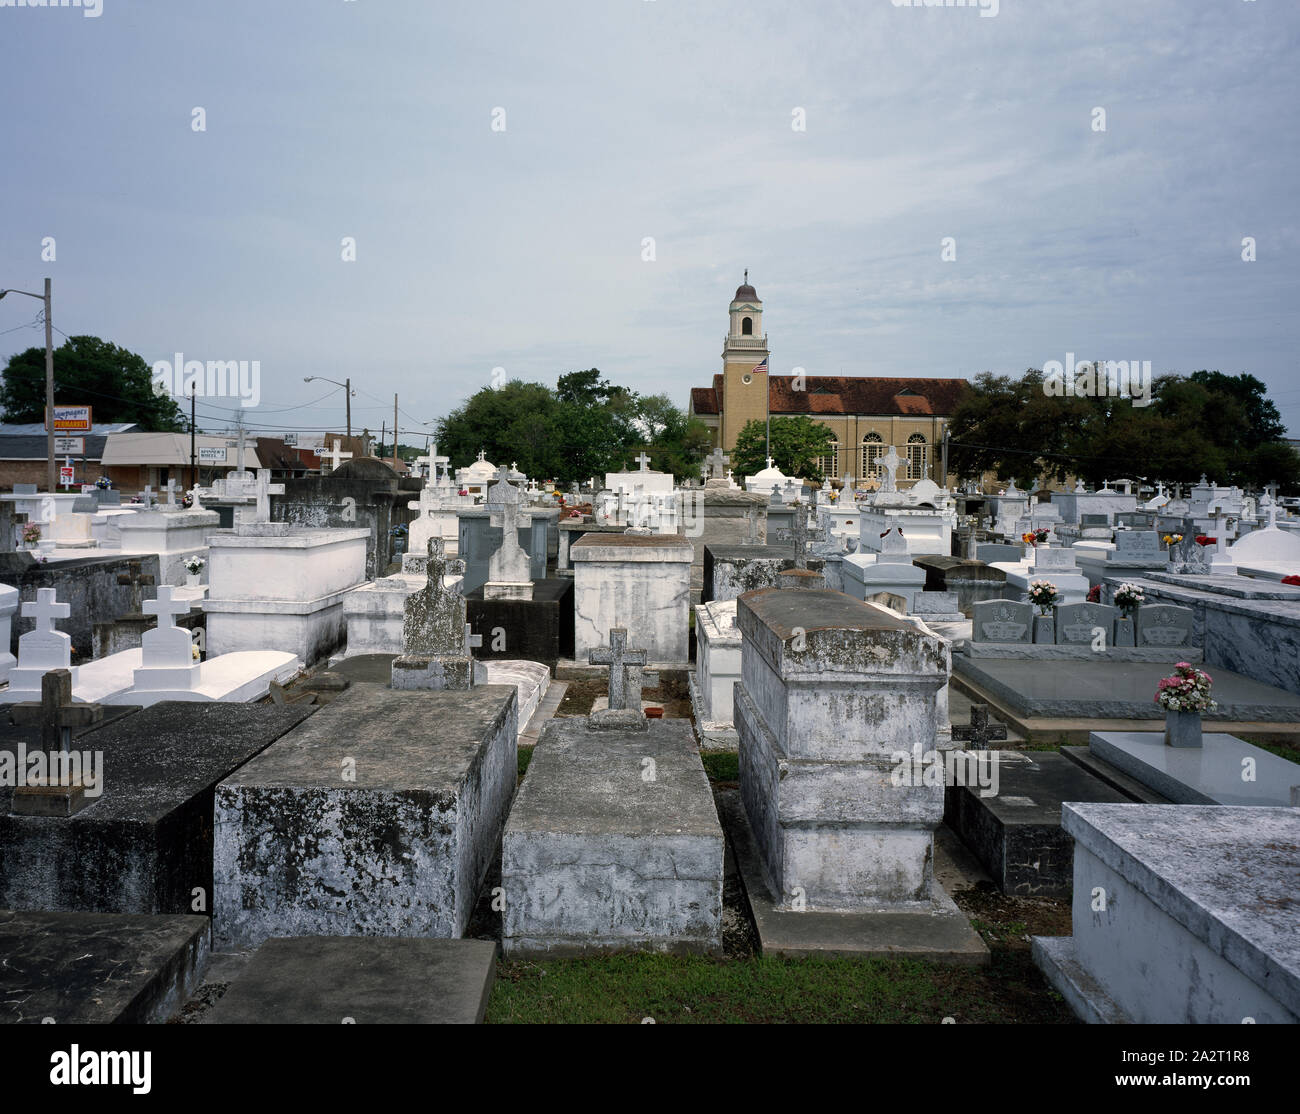 City of the Dead, in which tombs must be above ground because of the high water table in New Orleans, Louisiana  Location is actually Rayne Louisiana, not New Orleans. Visible beyond the cemetery of St. Joseph Catholic Church.  At left of the photo business visible include Champagne's Supermarket, The Spinner's Wheel, Rayne Rent-All, and Cox (cable tv/communications company). Stock Photo